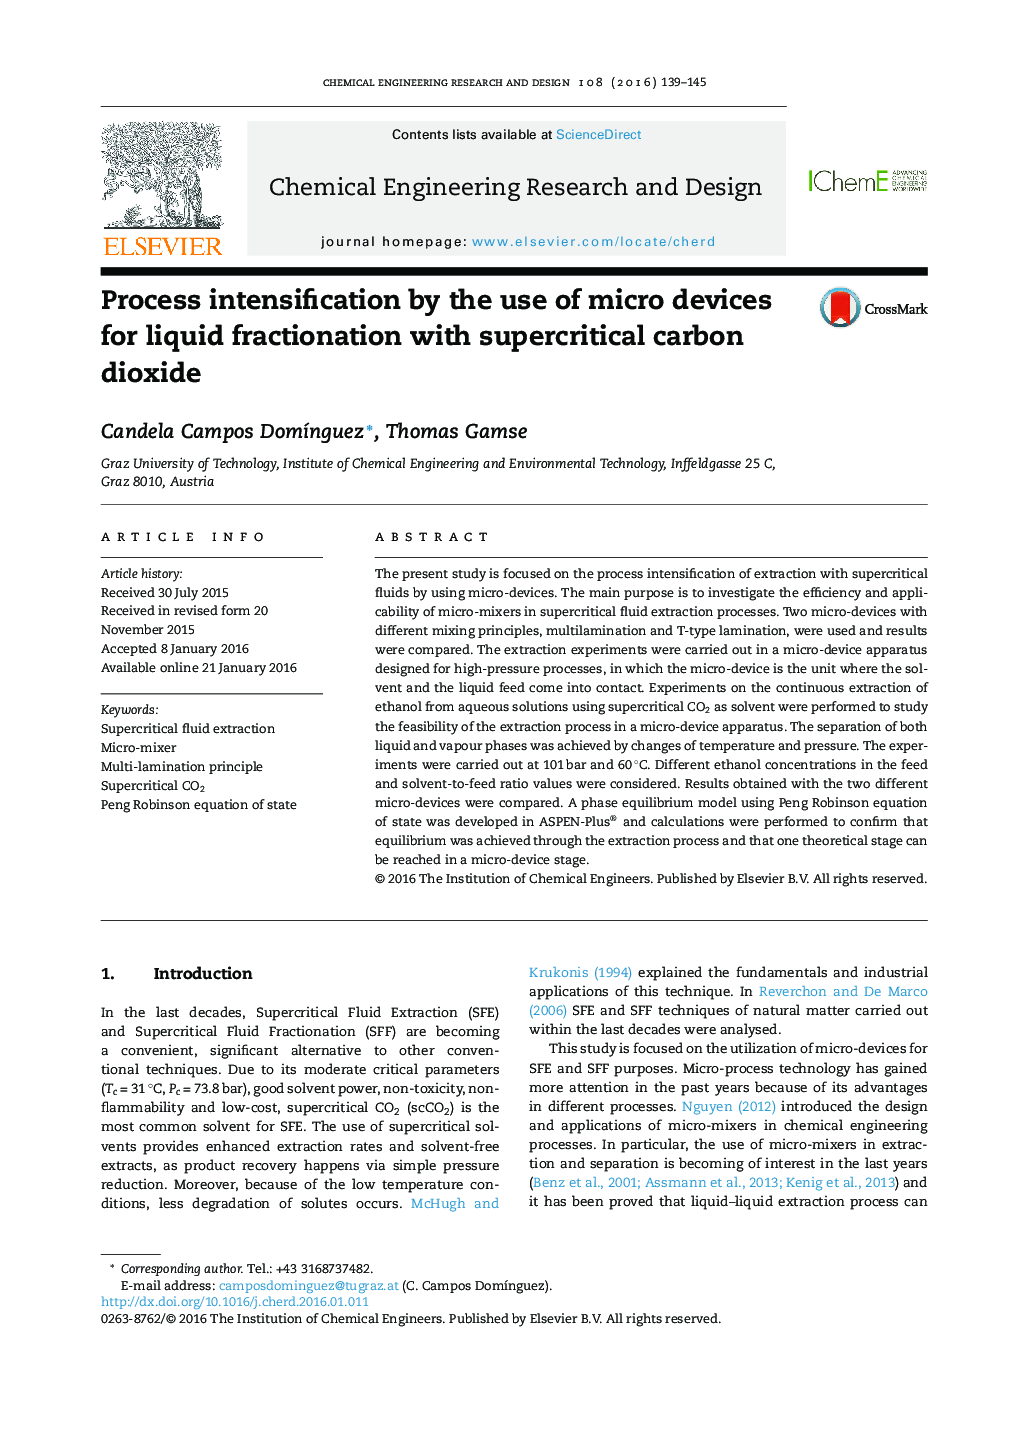 Process intensification by the use of micro devices for liquid fractionation with supercritical carbon dioxide